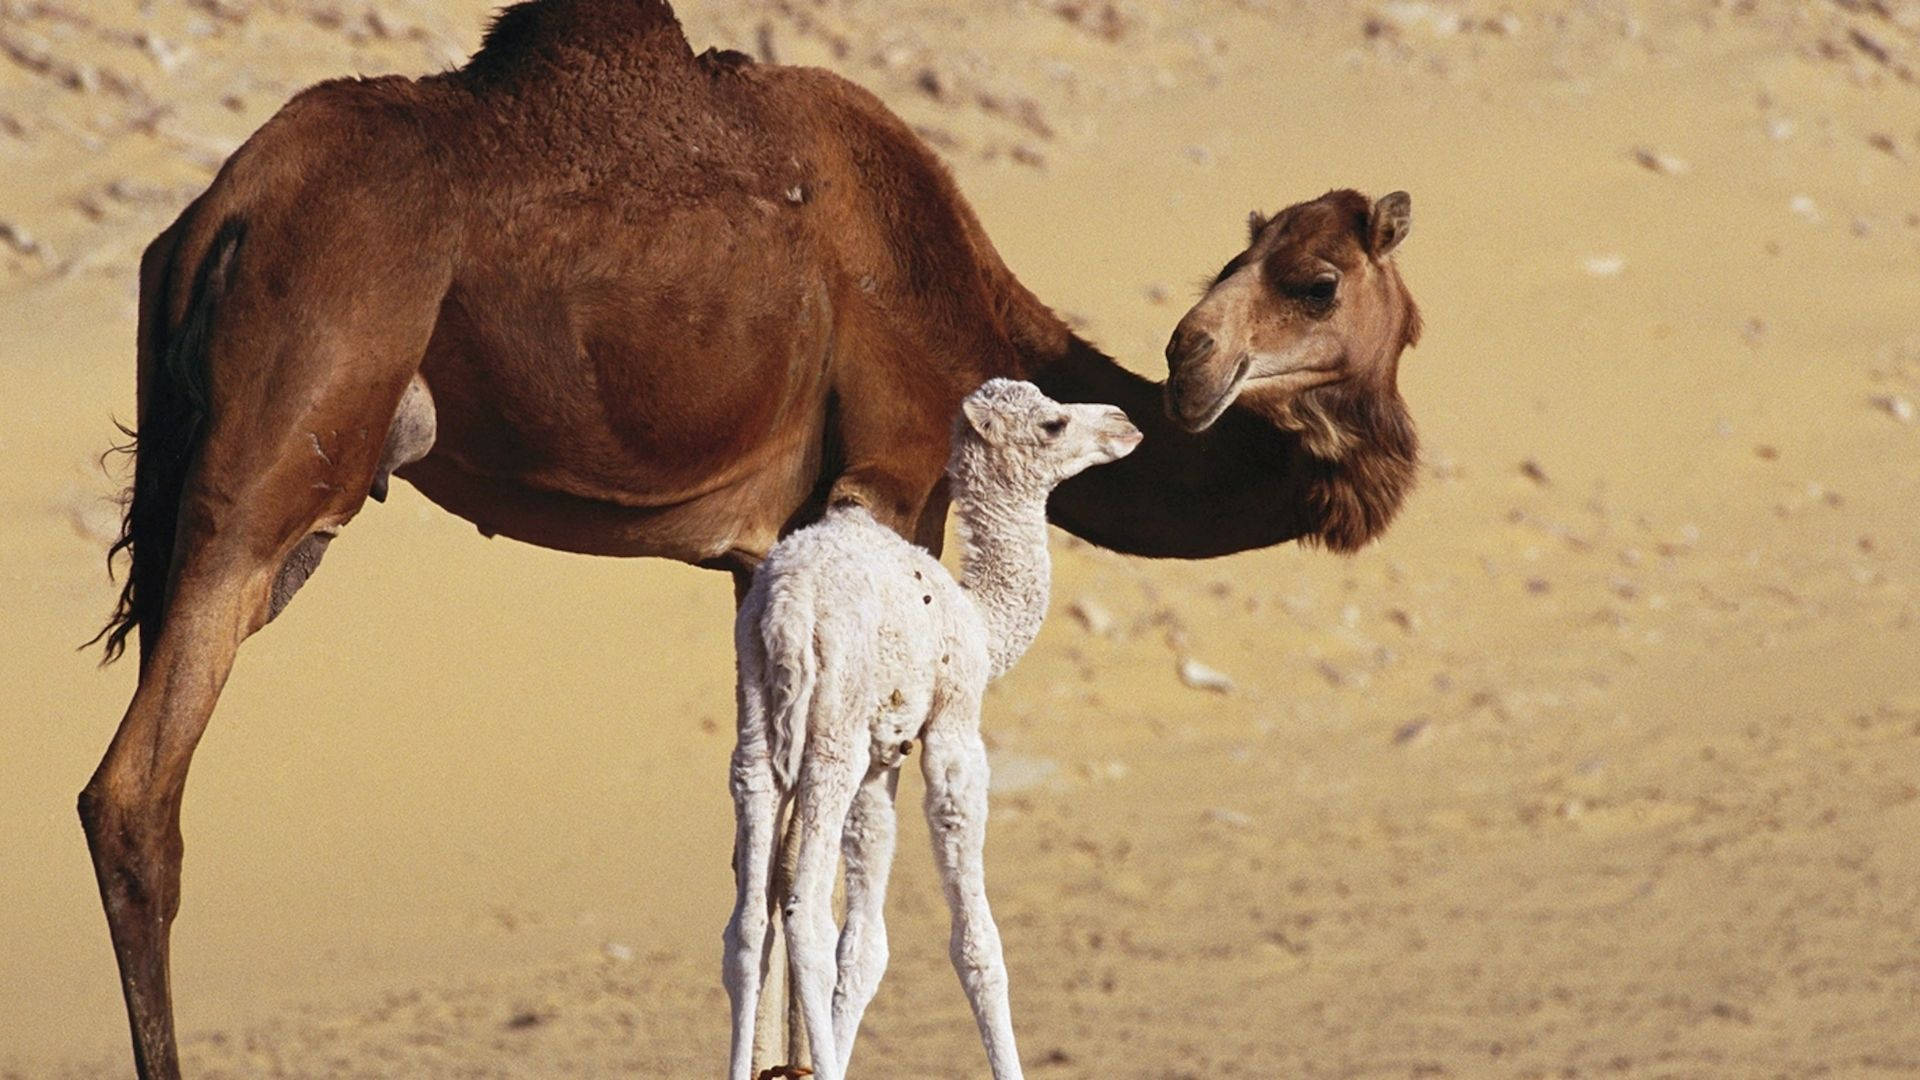 A Cherished Moment Between a Mother Camel and Her Baby Wallpaper